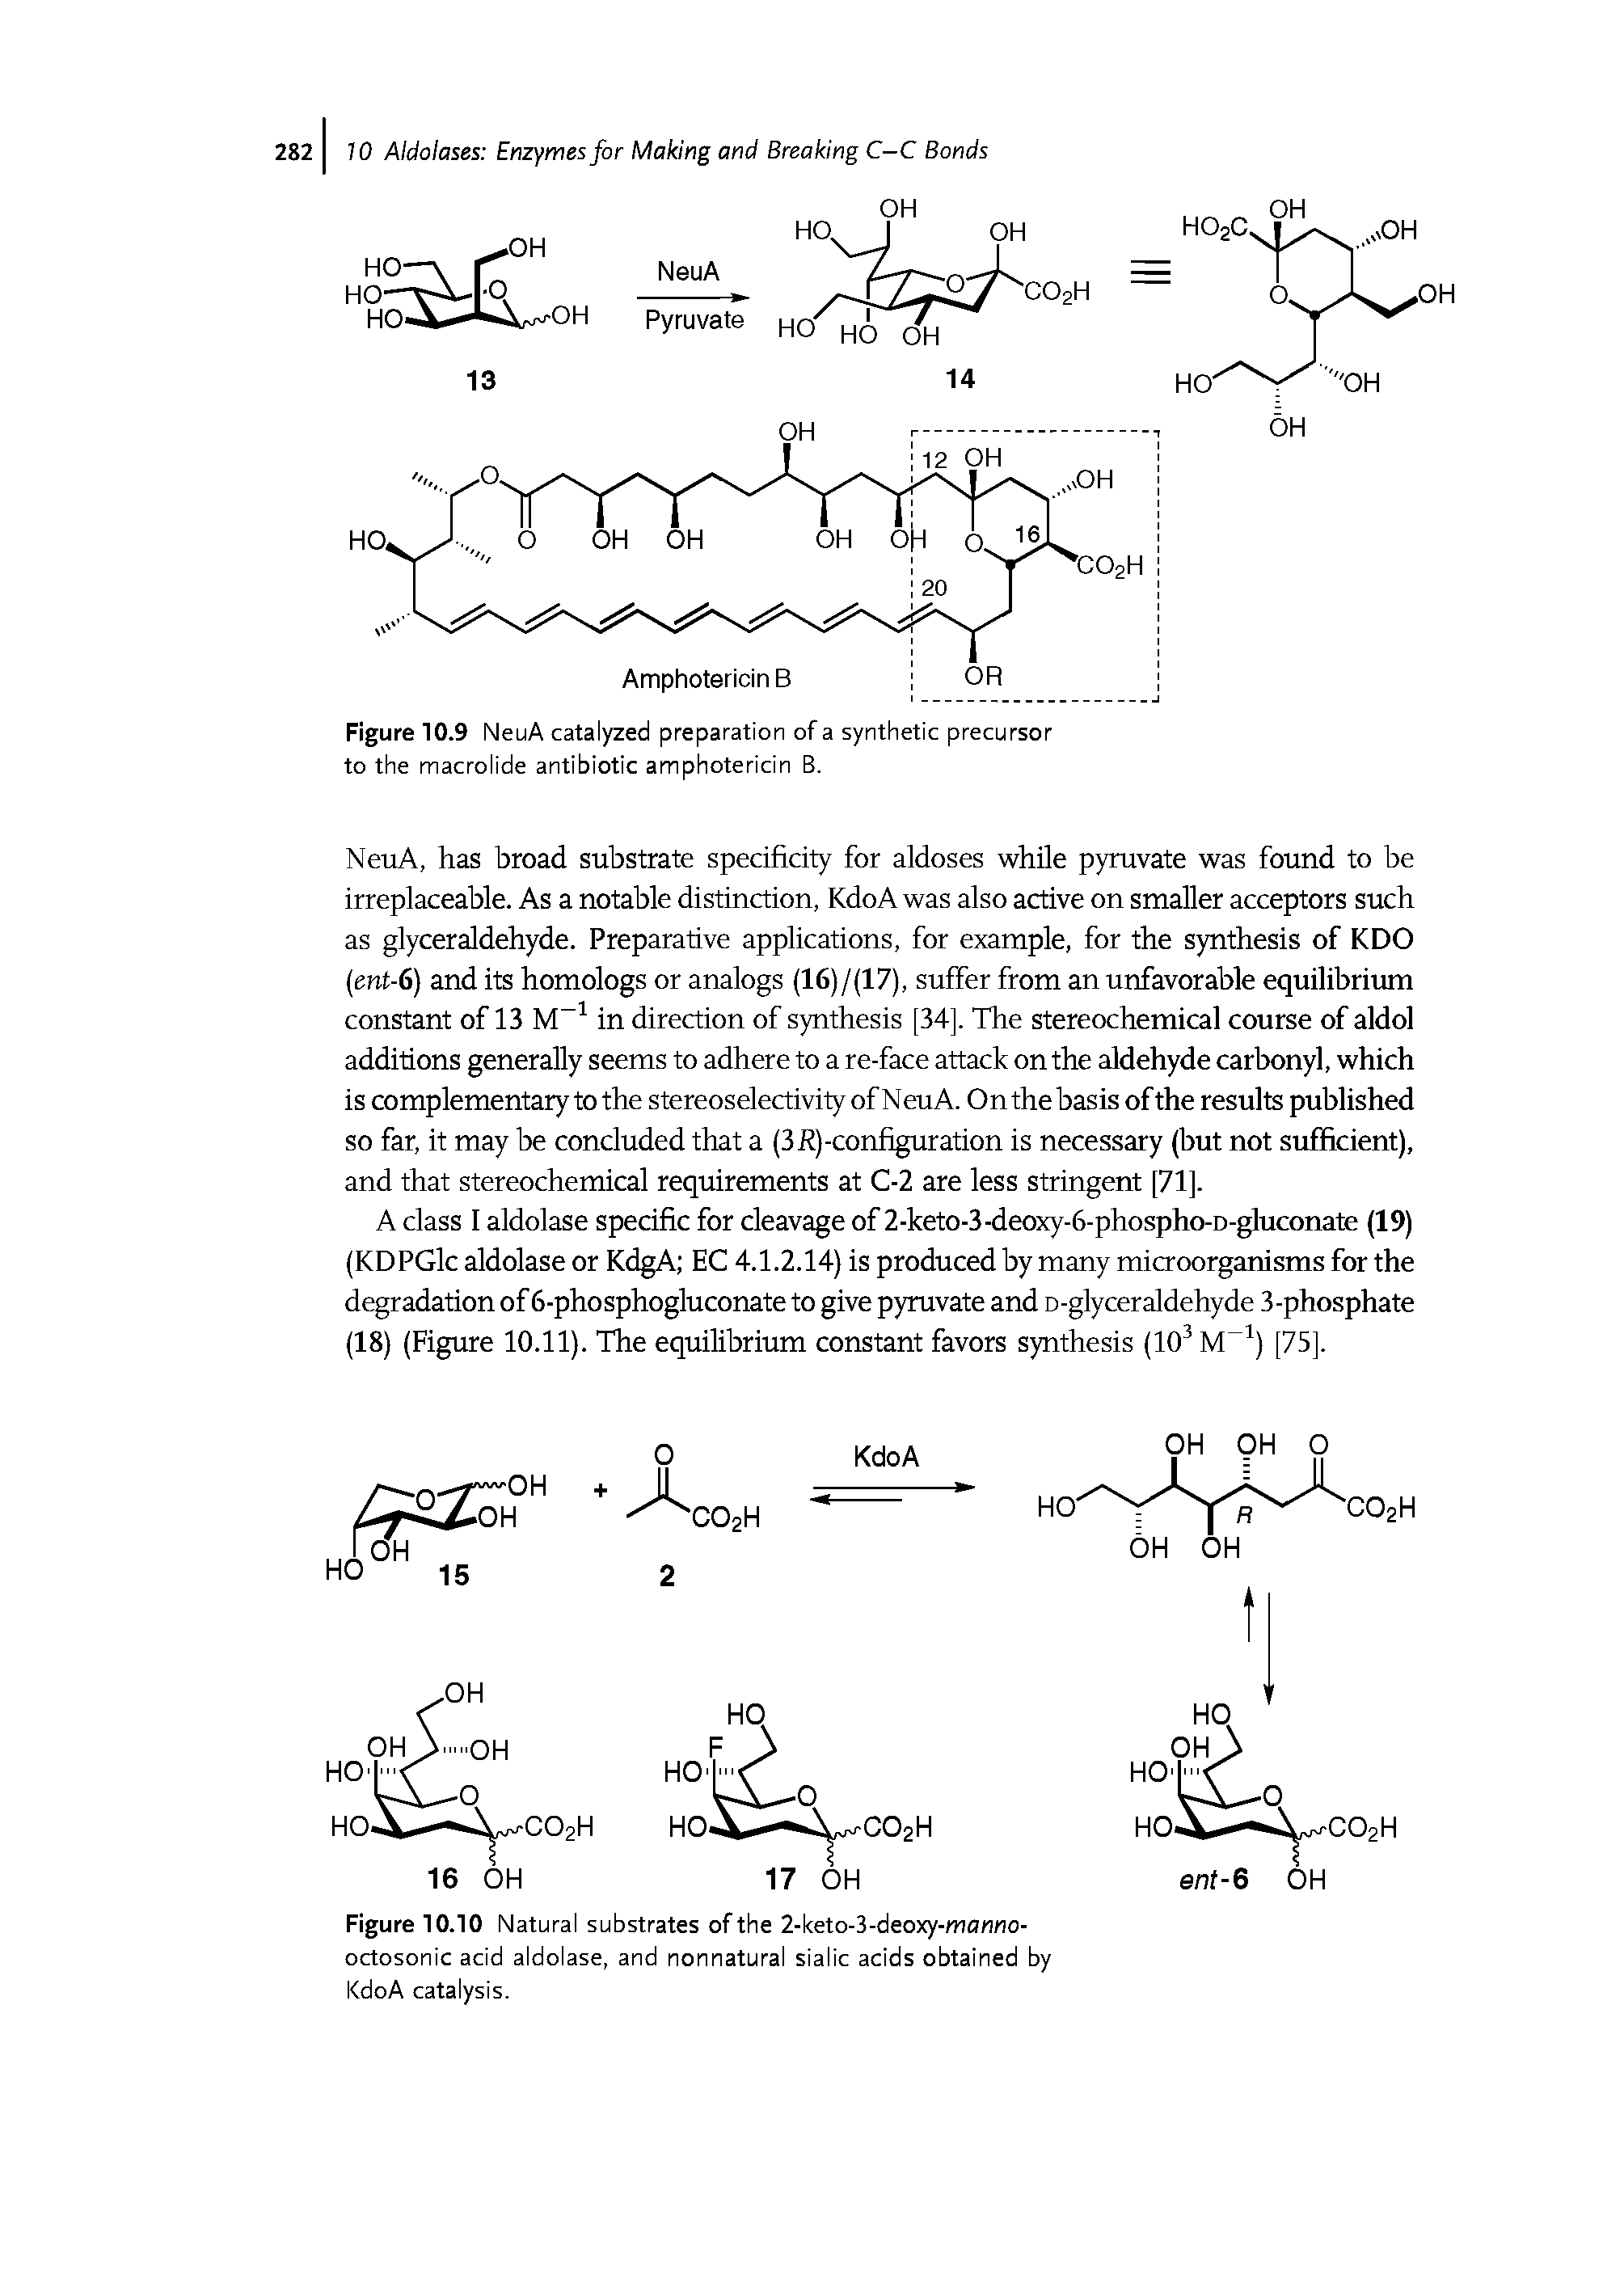 Figure 10.10 Natural substrates of the 2-keto-3-deoxy-monno-octosonic acid aldolase, and nonnatural sialic acids obtained by KdoA catalysis.